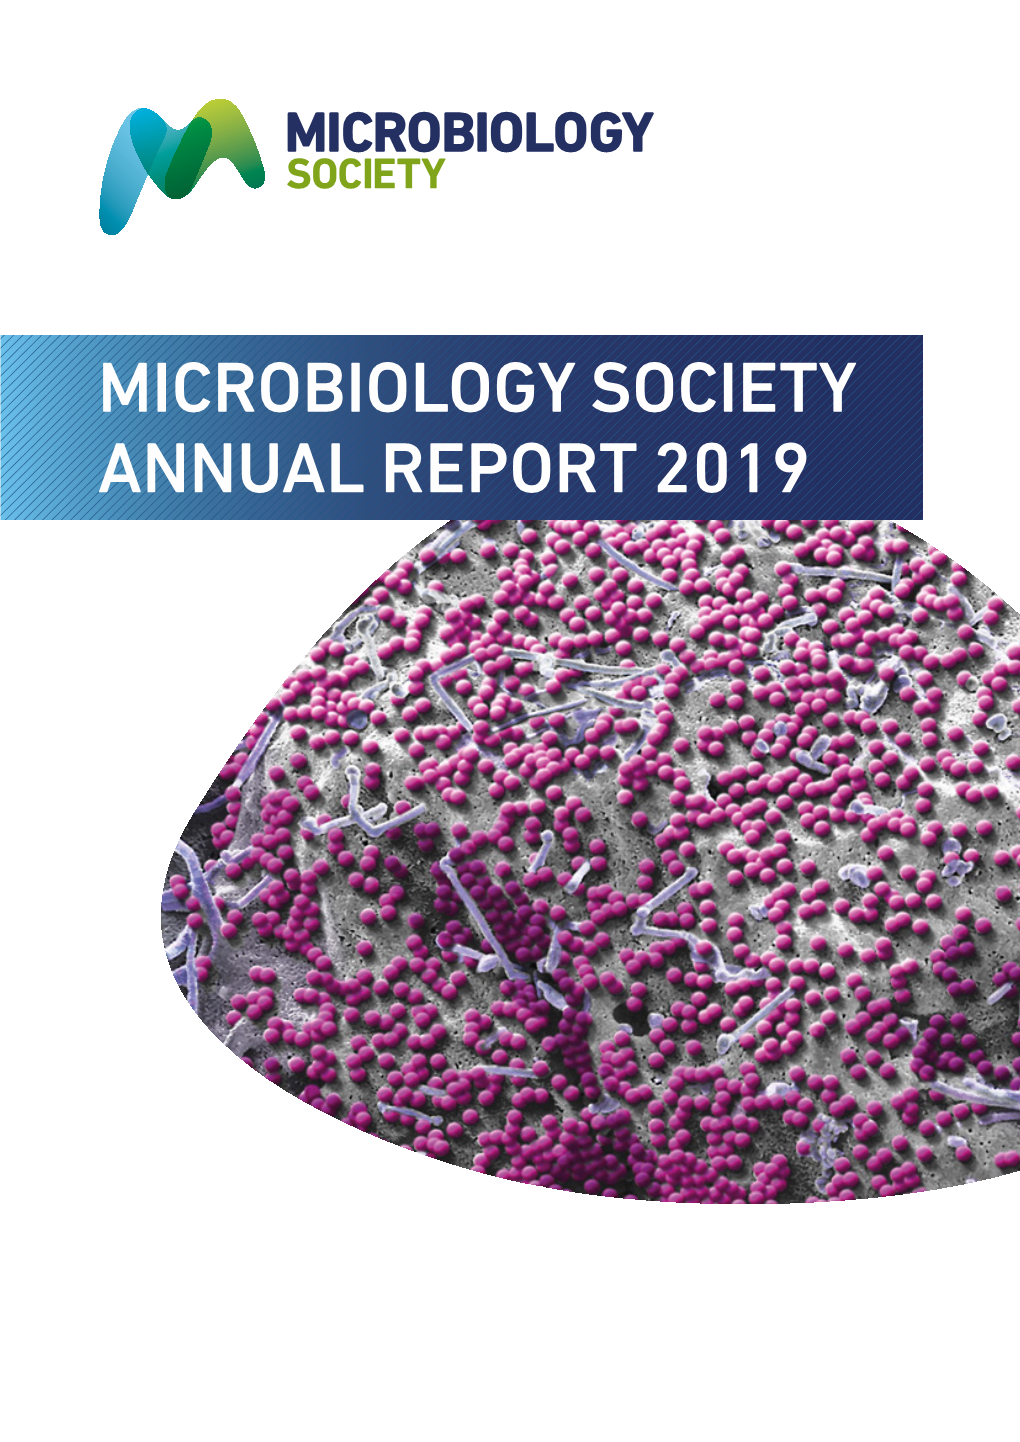 MICROBIOLOGY SOCIETY ANNUAL REPORT 2019 Microbiology Society (Limited by Guarantee)